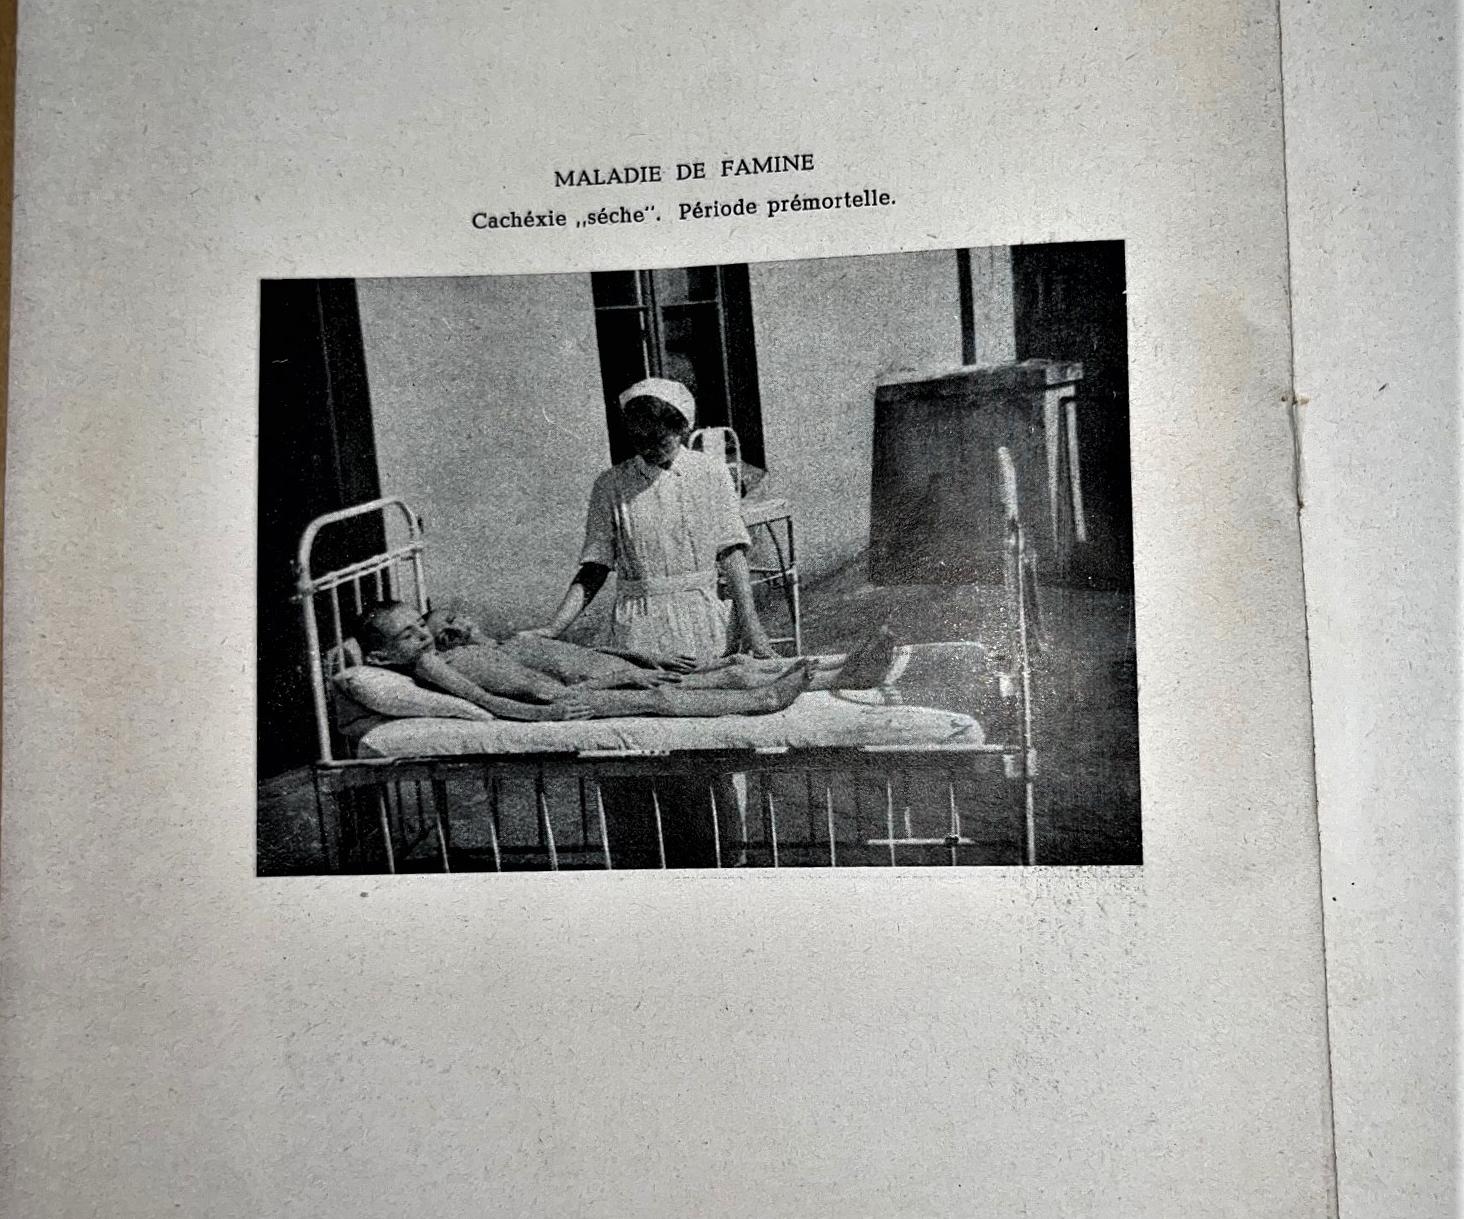 The book includes haunting photos from inside the ghetto, along with its record of the medical effects of starvation. 